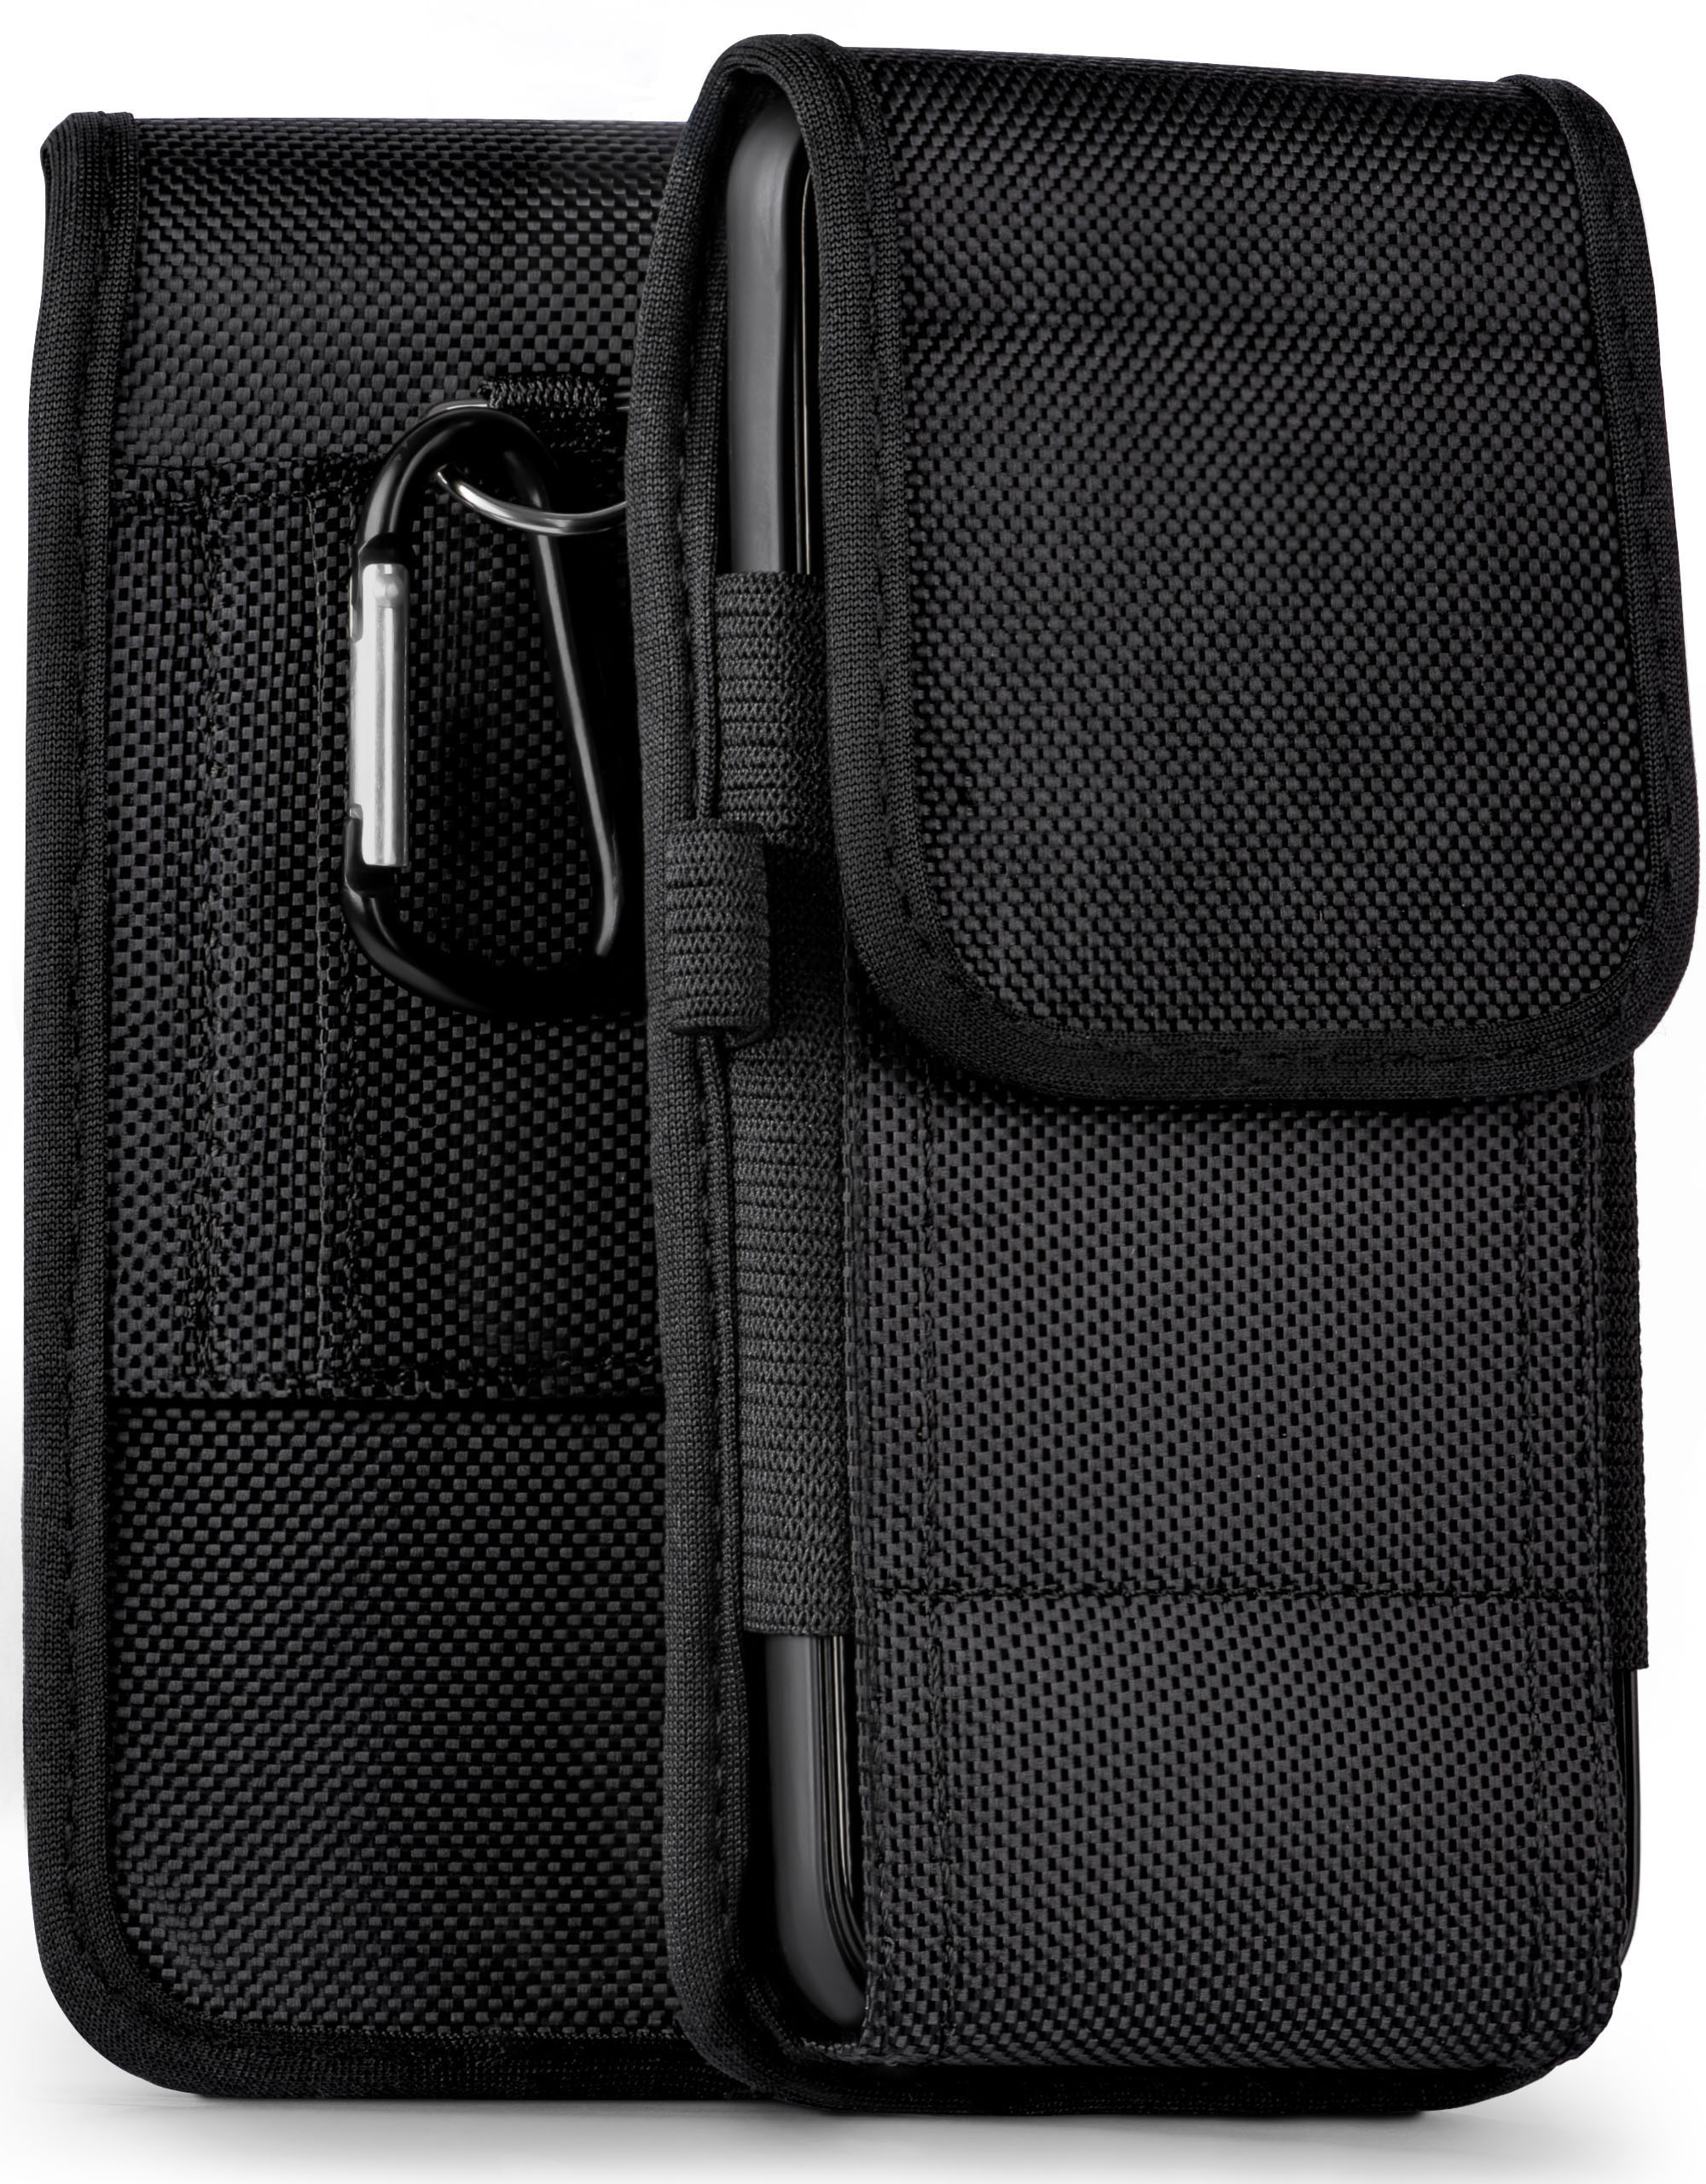 Agility Case, Trail Mate 10, Holster, Huawei, MOEX